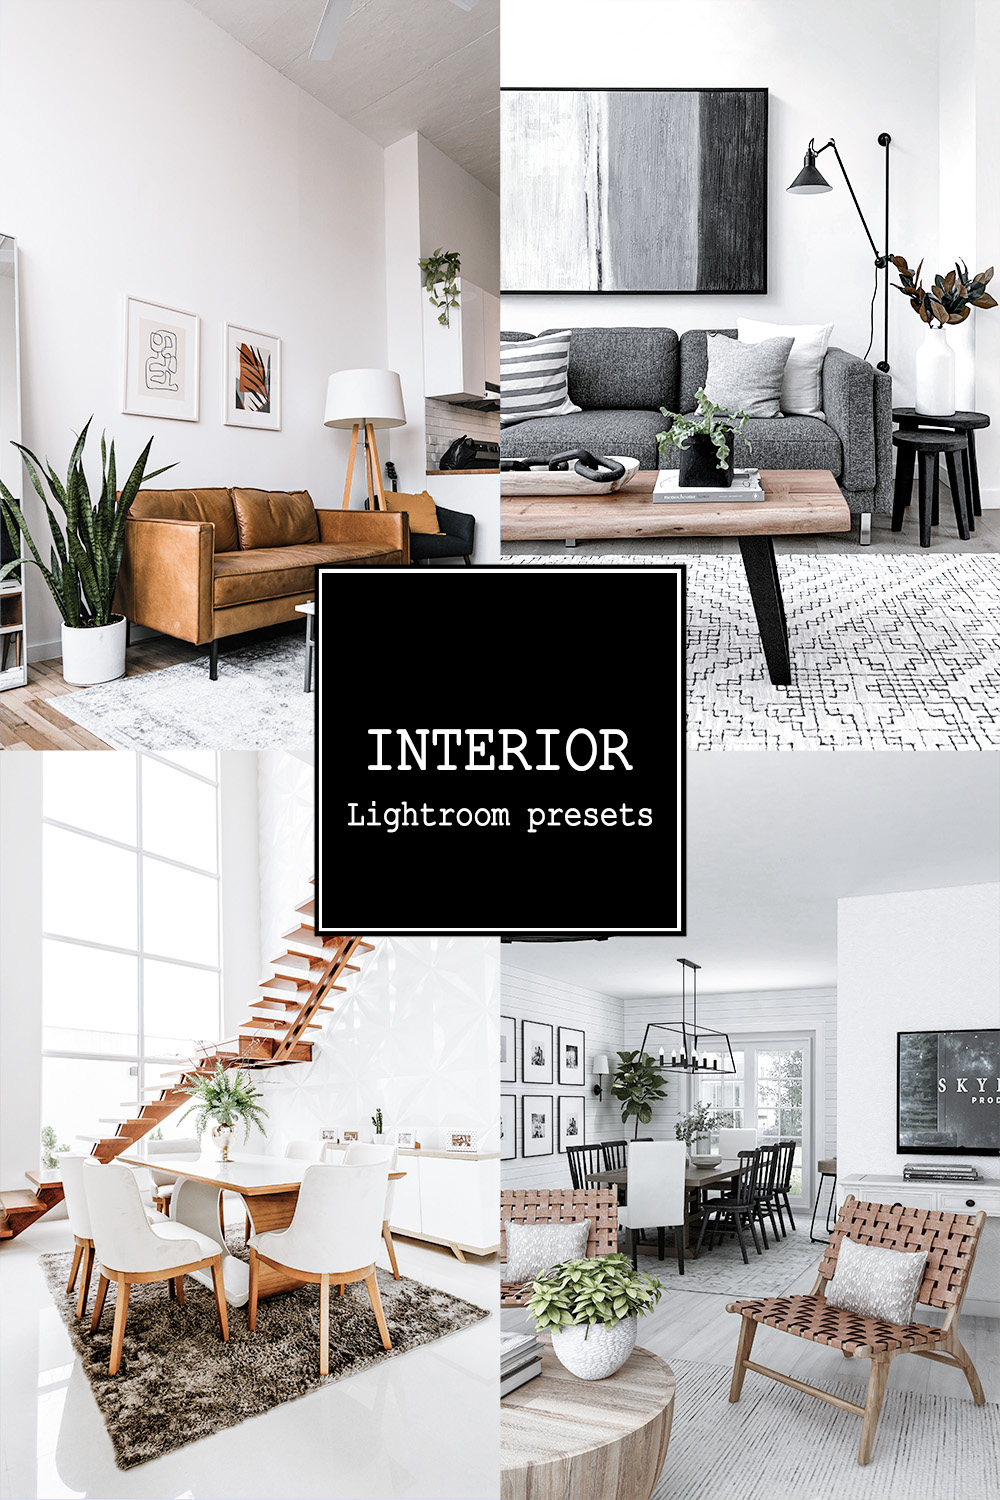 A pack of beautiful images of interiors